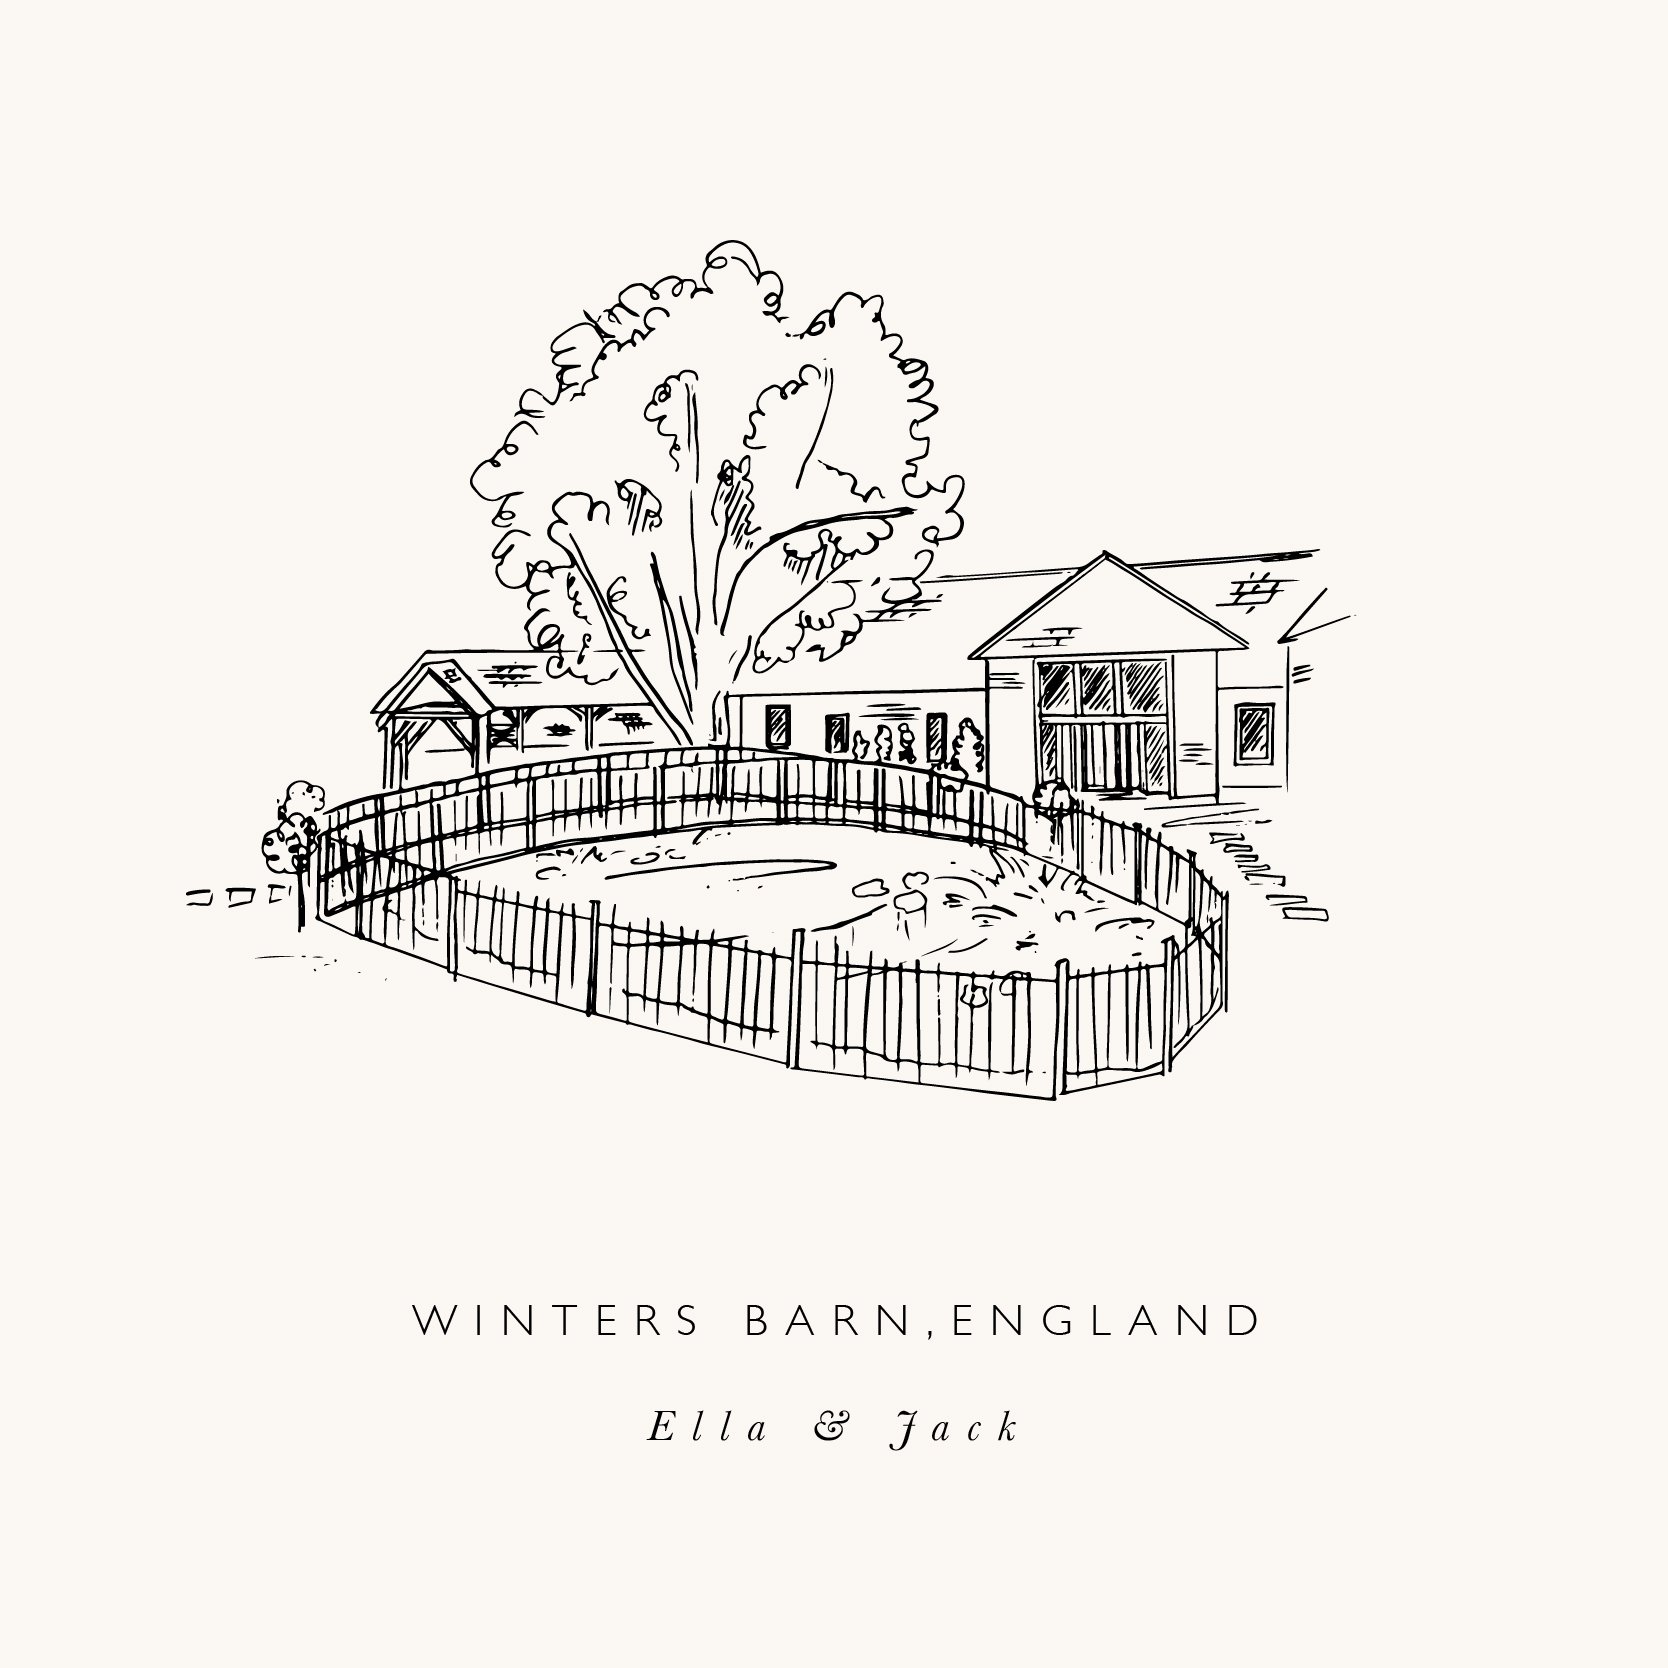 Four ways to include a wedding venue illustration within your invitations   Written By Emily